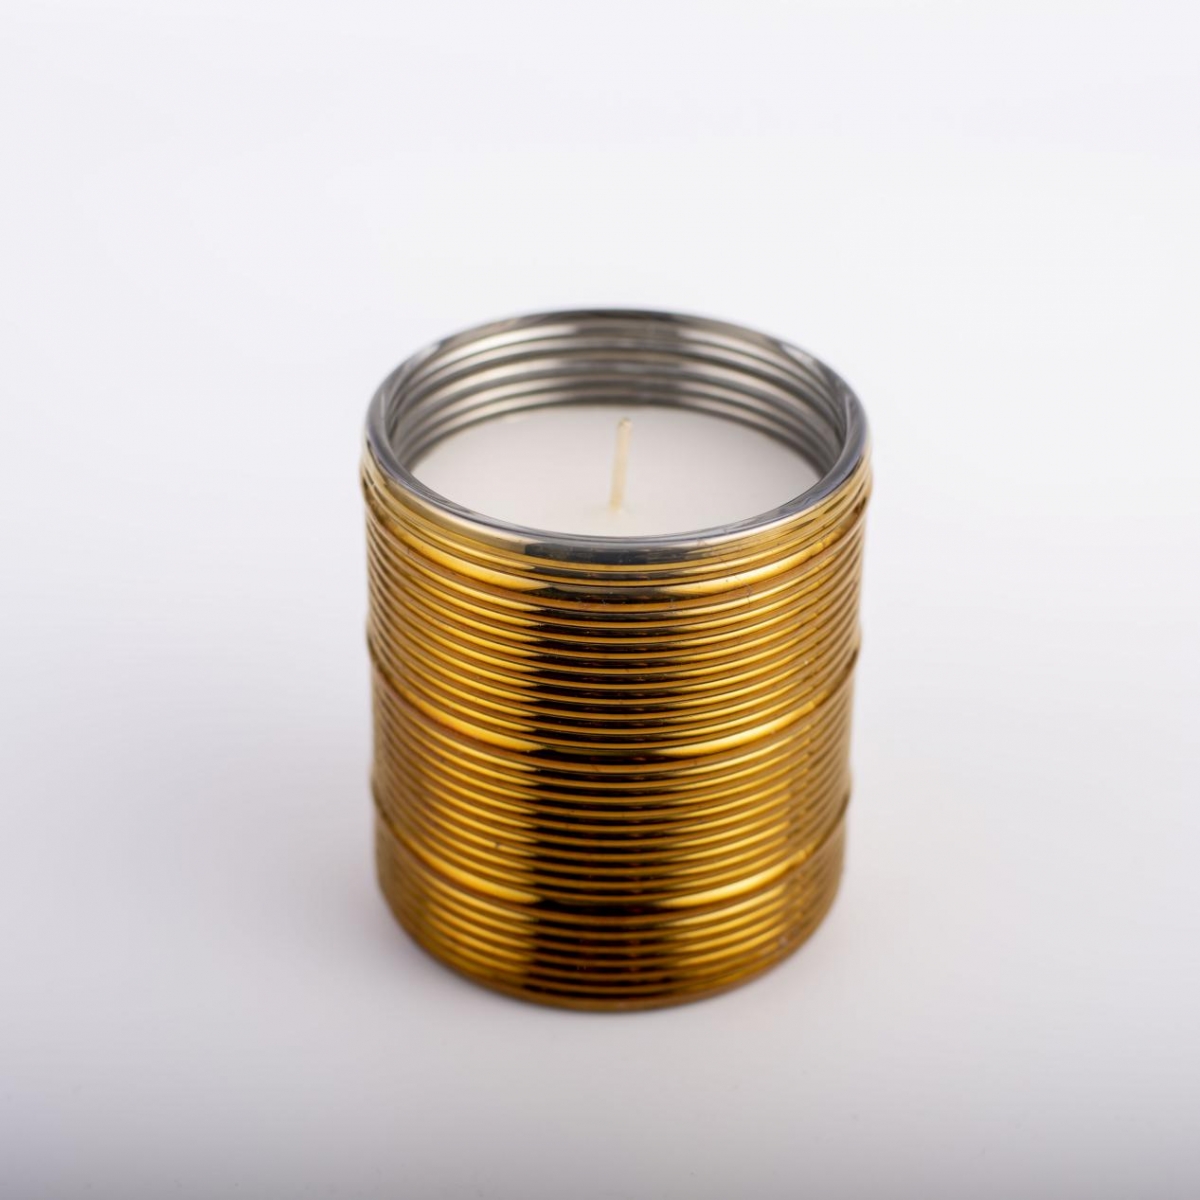 Scented Candles – Horizontal Stripes ,Gold Glass ,Vegan Candles ,China Factory ,Price-HOWCANDLE-Candles,Scented Candles,Aromatherapy Candles,Soy Candles,Vegan Candles,Jar Candles,Pillar Candles,Candle Gift Sets,Essential Oils,Reed Diffuser,Candle Holder,